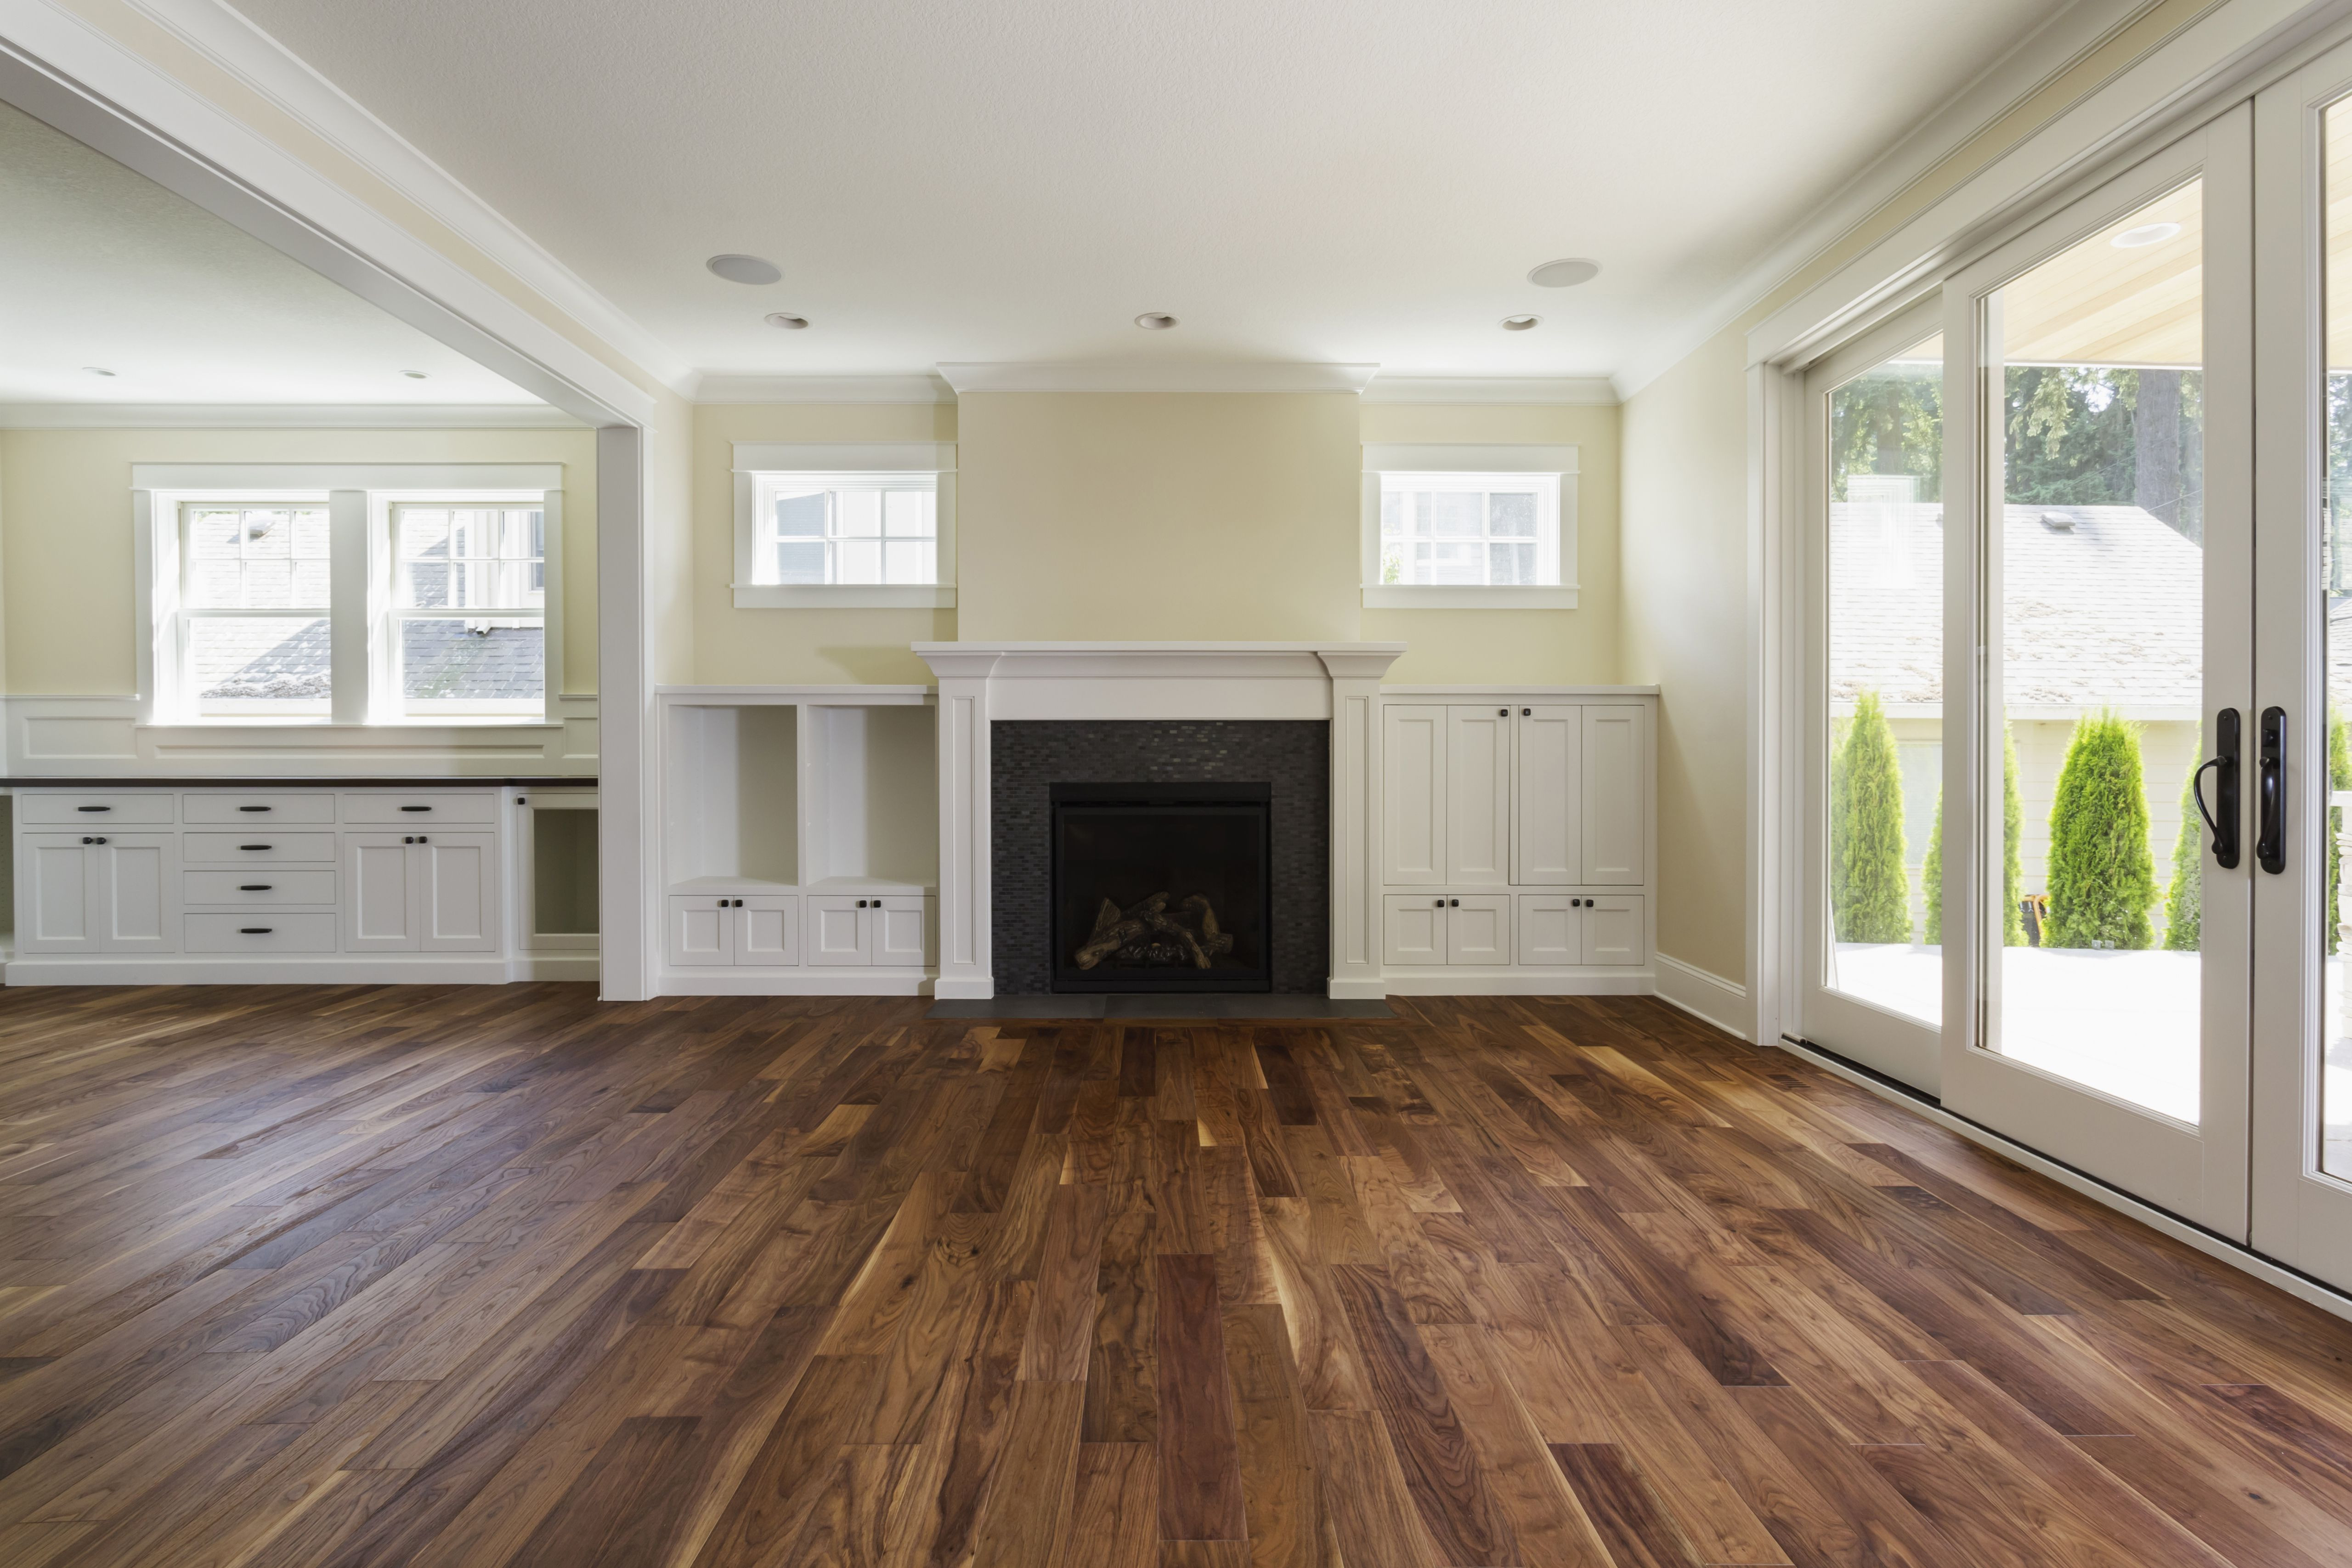 19 Stylish Bamboo Flooring Cheaper Than Hardwood 2024 free download bamboo flooring cheaper than hardwood of the pros and cons of prefinished hardwood flooring with fireplace and built in shelves in living room 482143011 57bef8e33df78cc16e035397